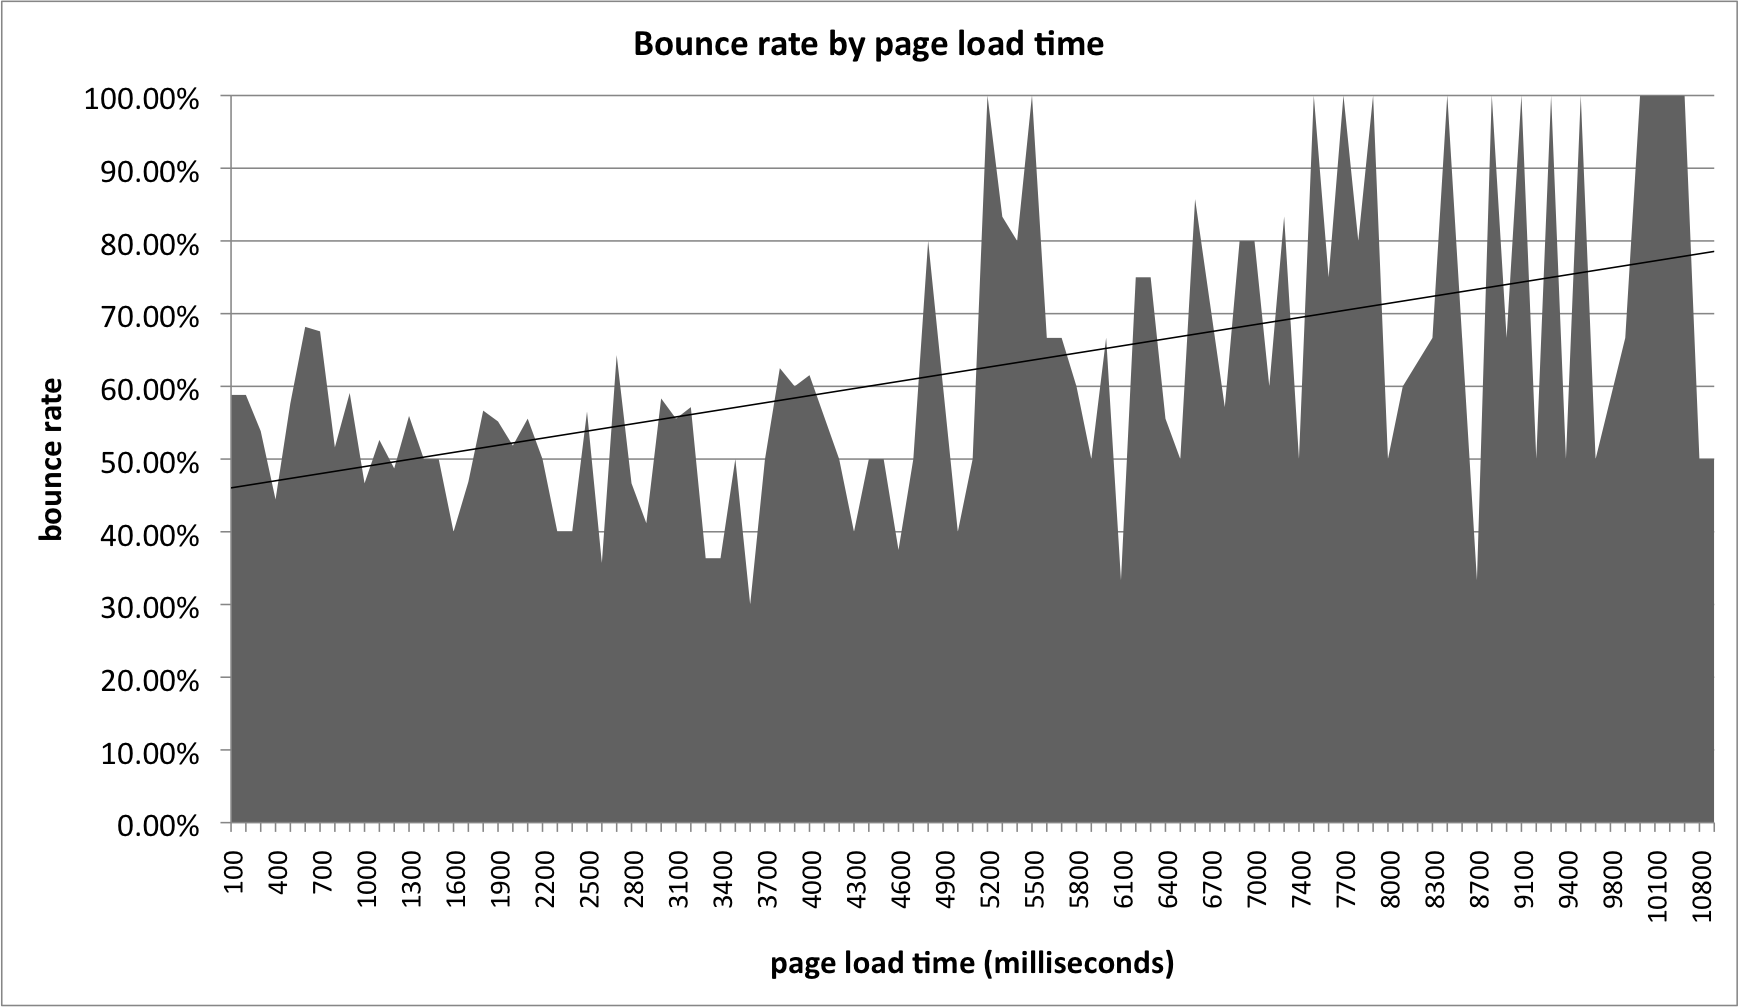 Bounce rate by page load time